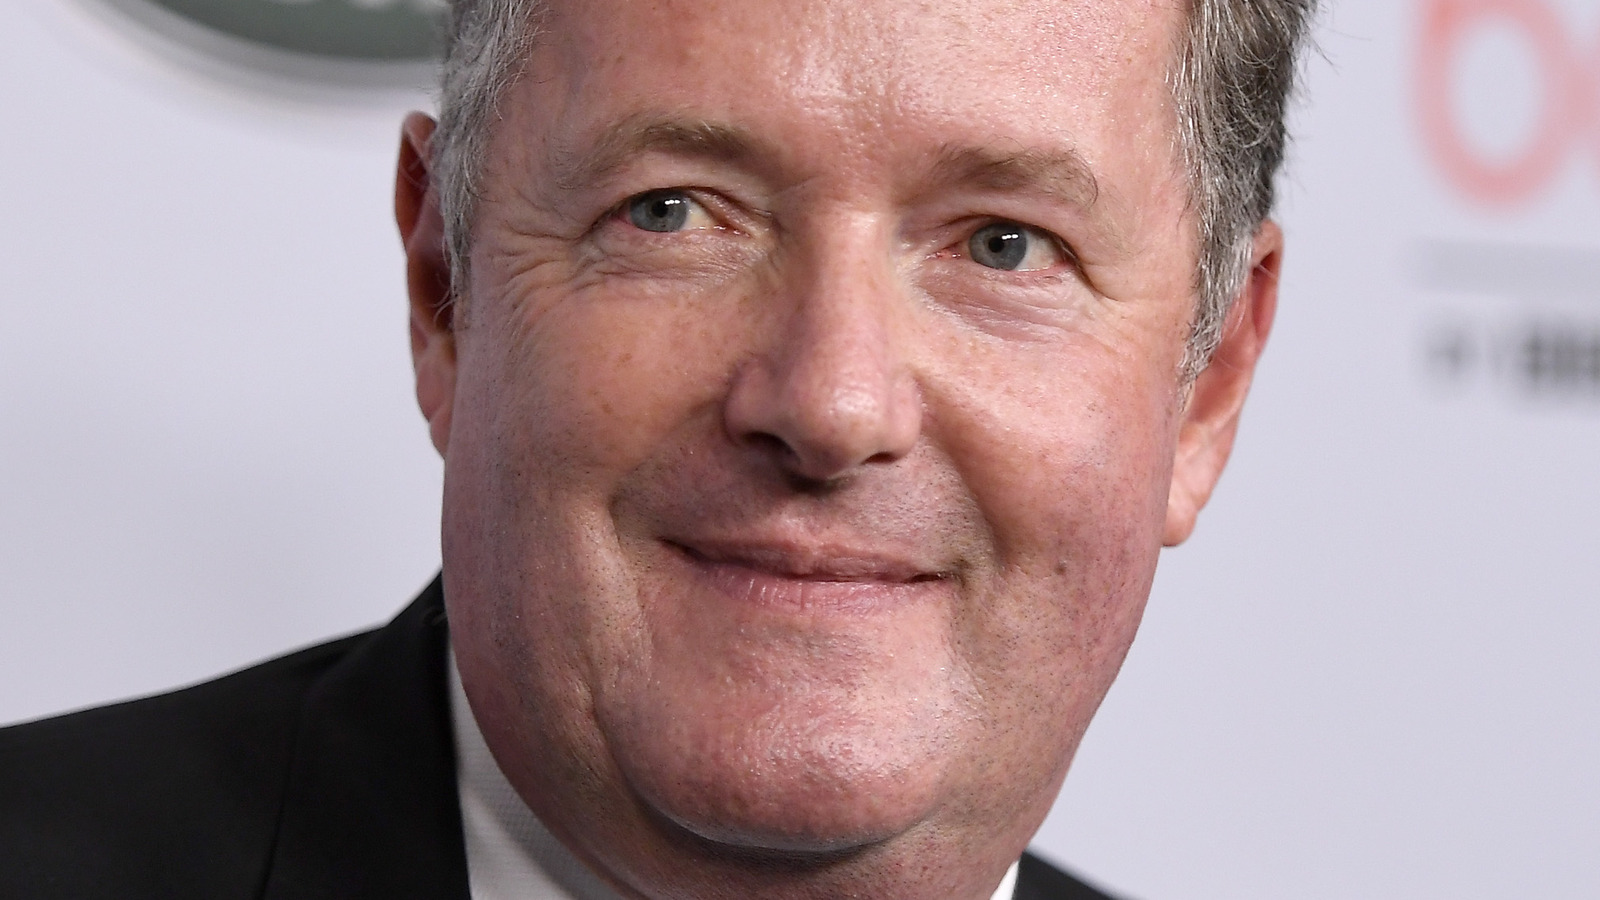 piers morgan claims the royal family has reached out to him